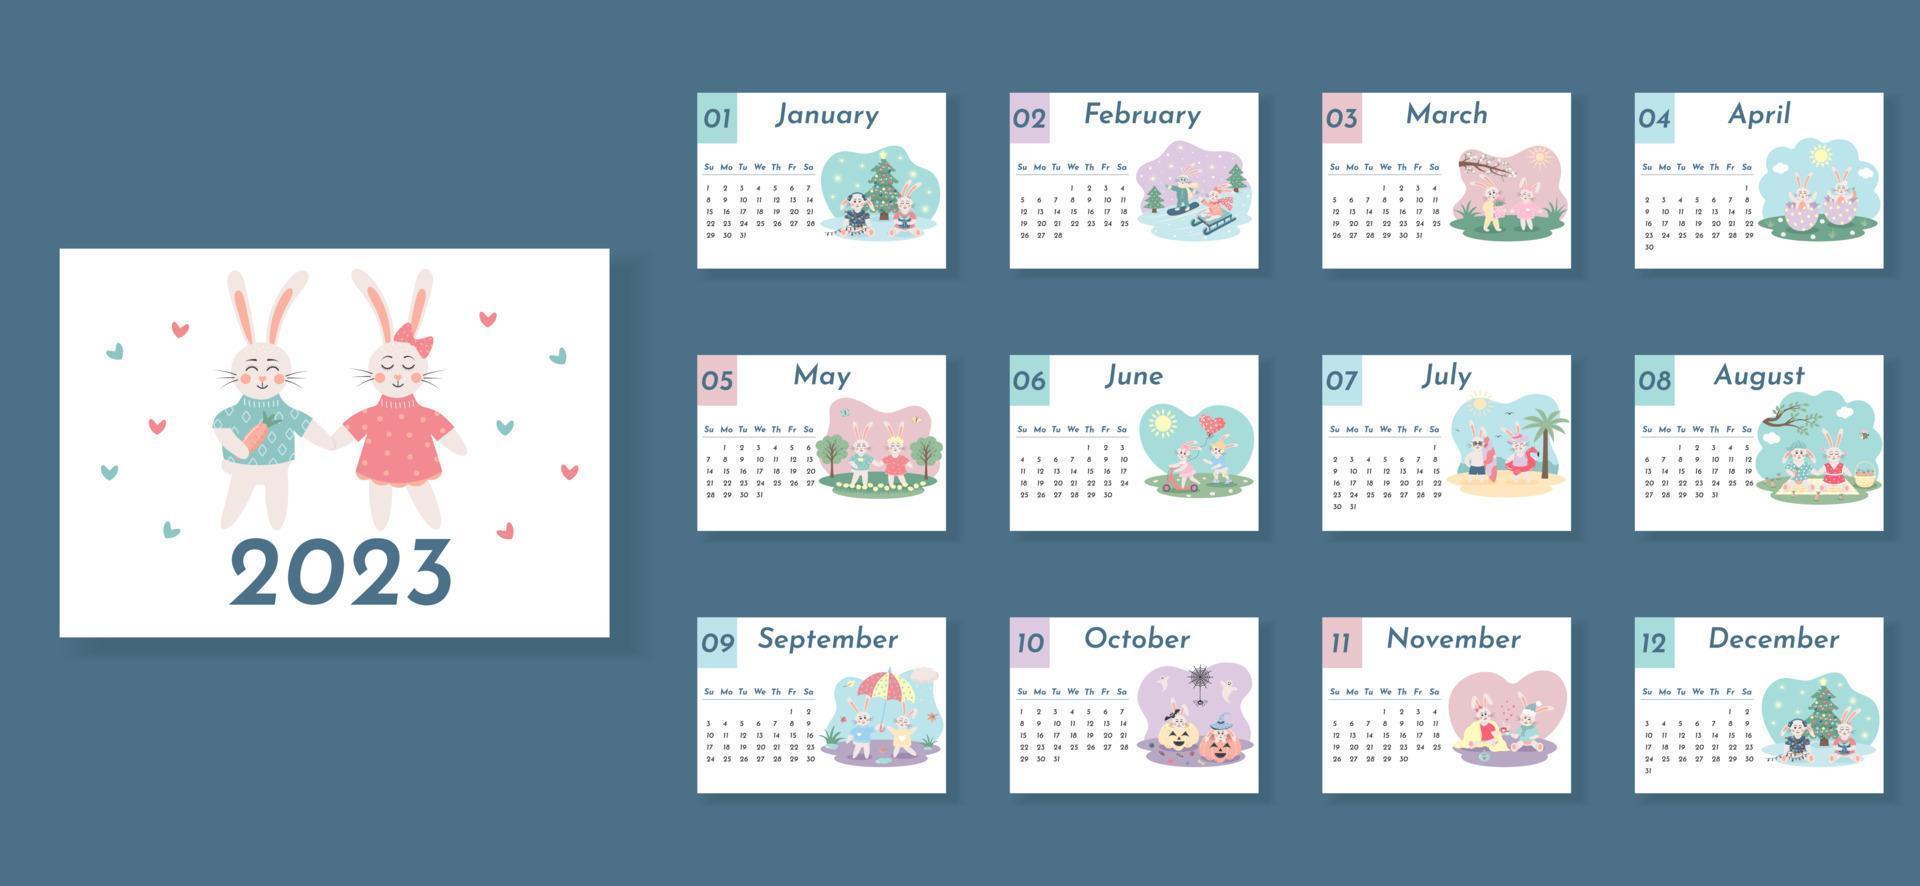 Printable horizontal monthly design calendar for 2023 with cute couple of bunnies in love. The product includes 12 pages for each month of the year and cover. Week starts from Sunday. vector